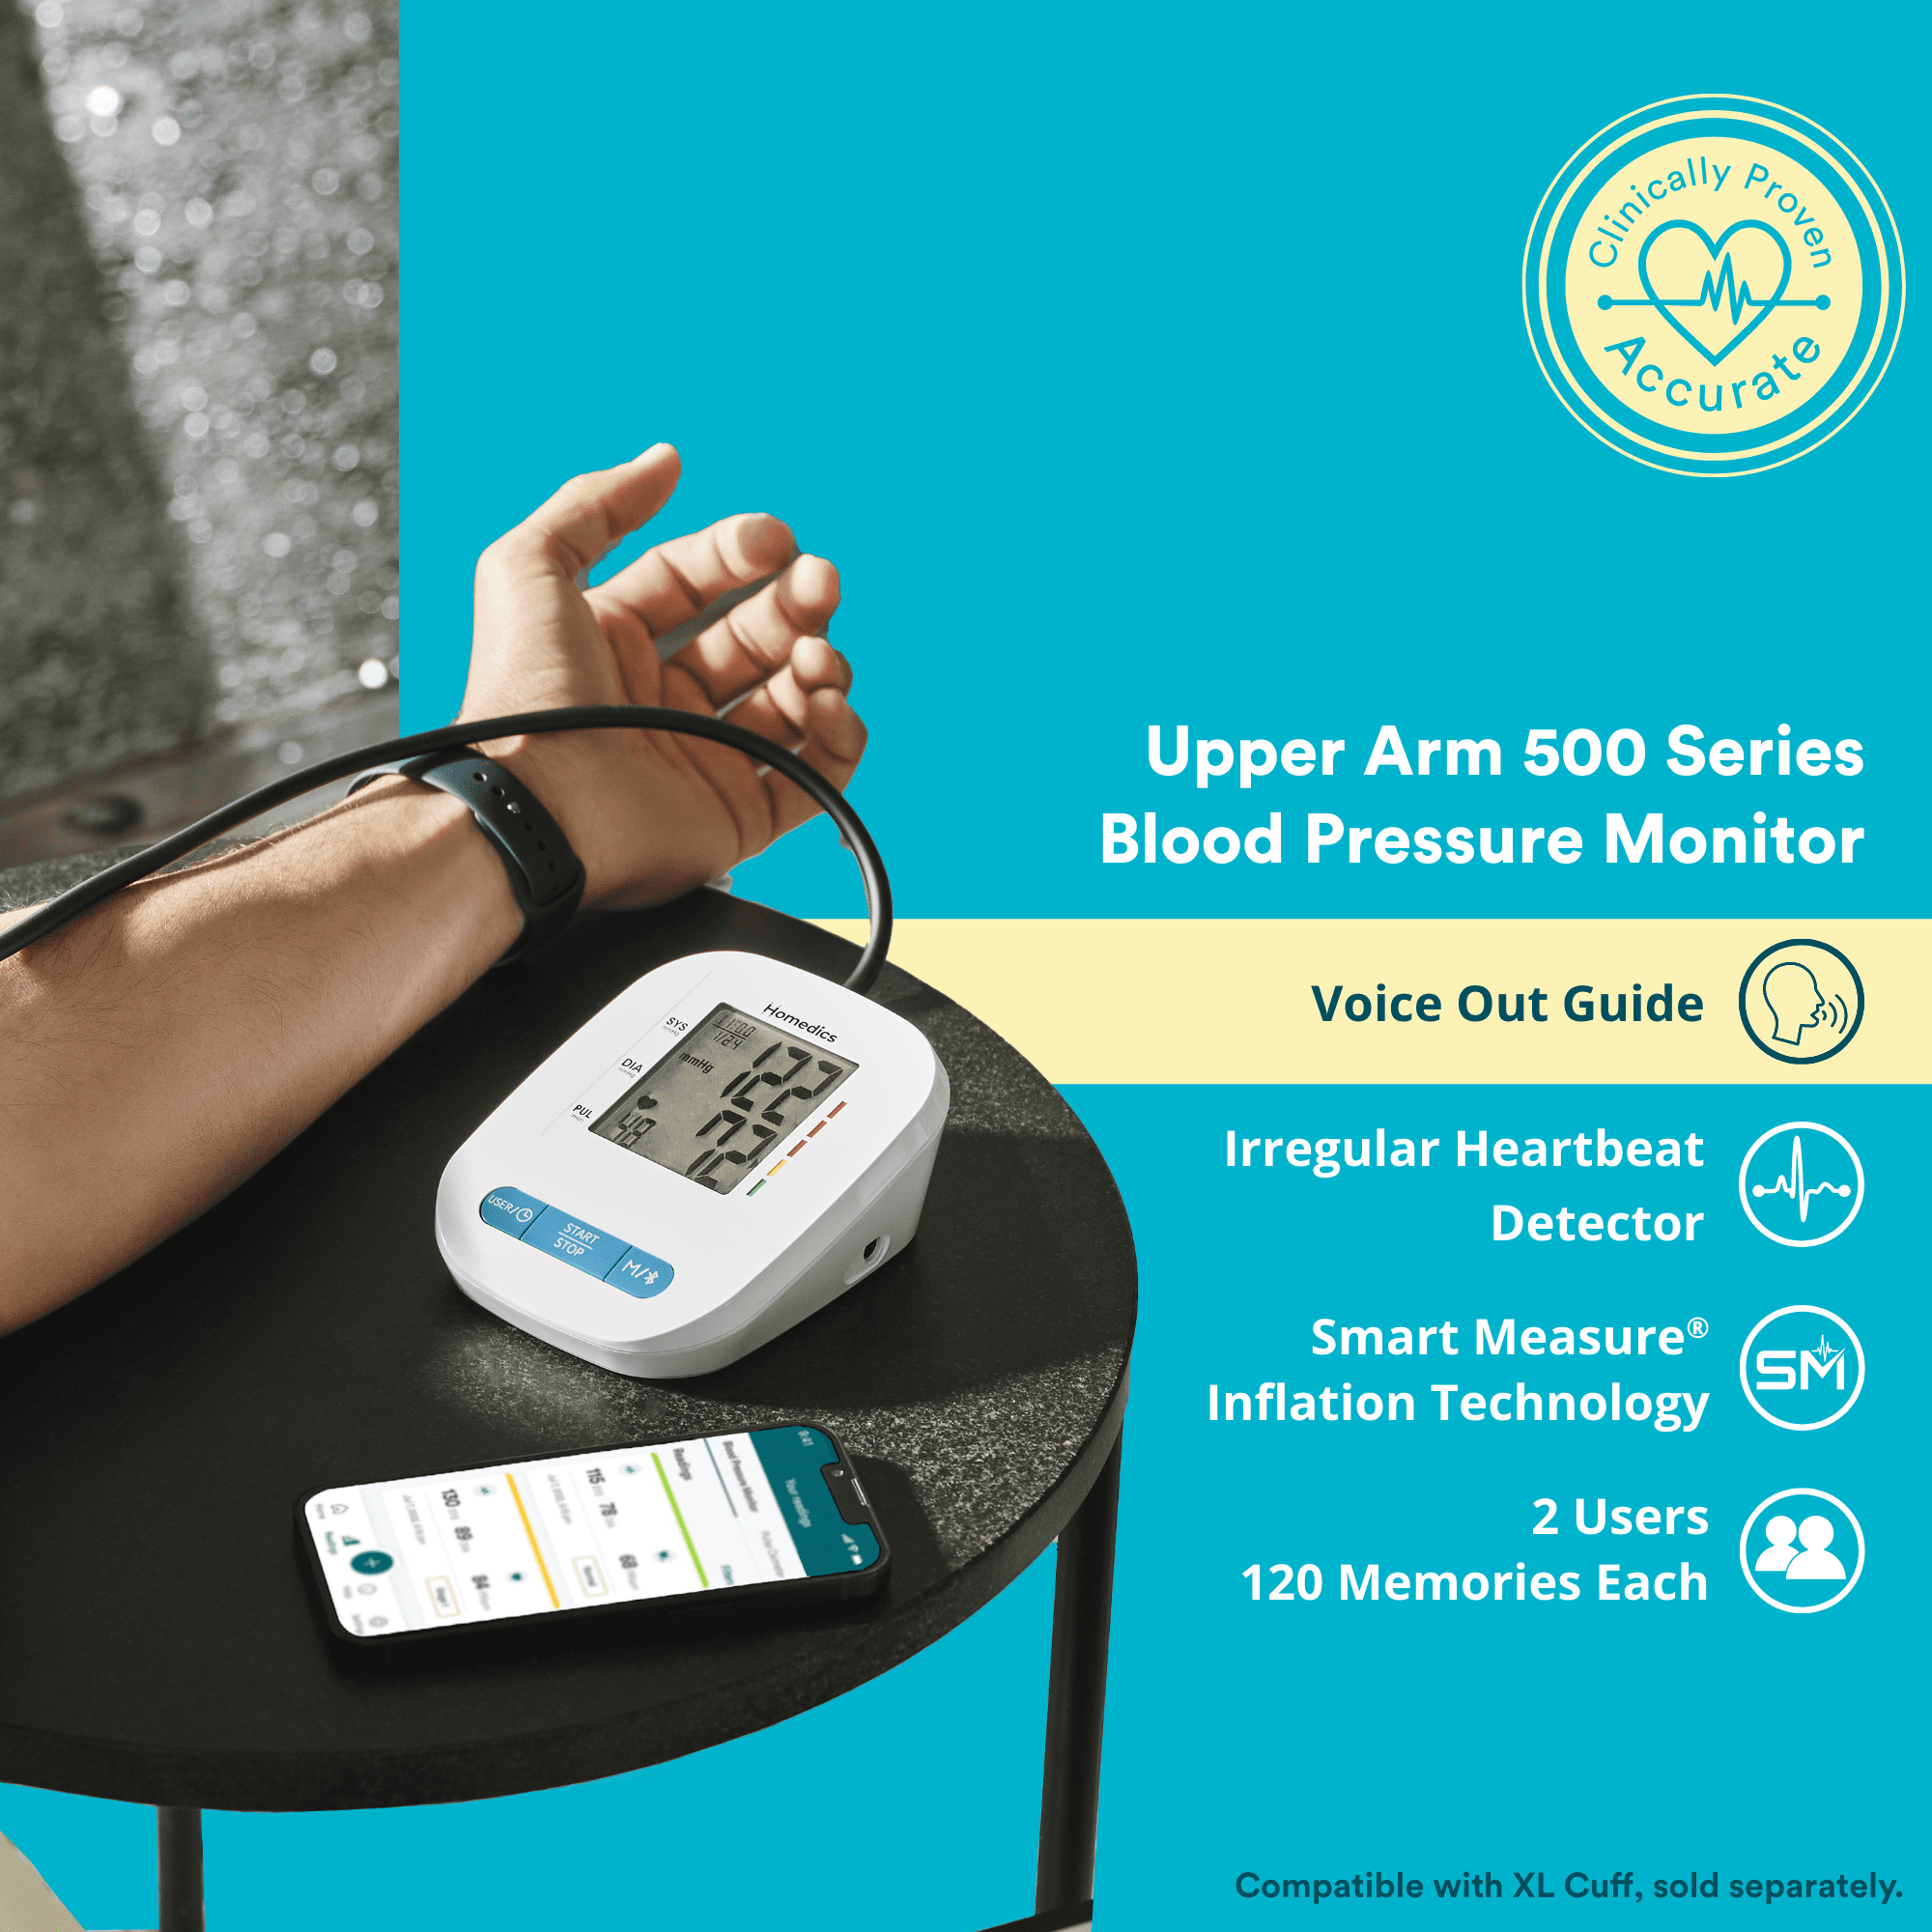 Homedics® Upper Arm 500 Series Blood Pressure Monitor, Voice Out Guide,  Easy Operation, Accurate Results, Bluetooth® wireless technology 